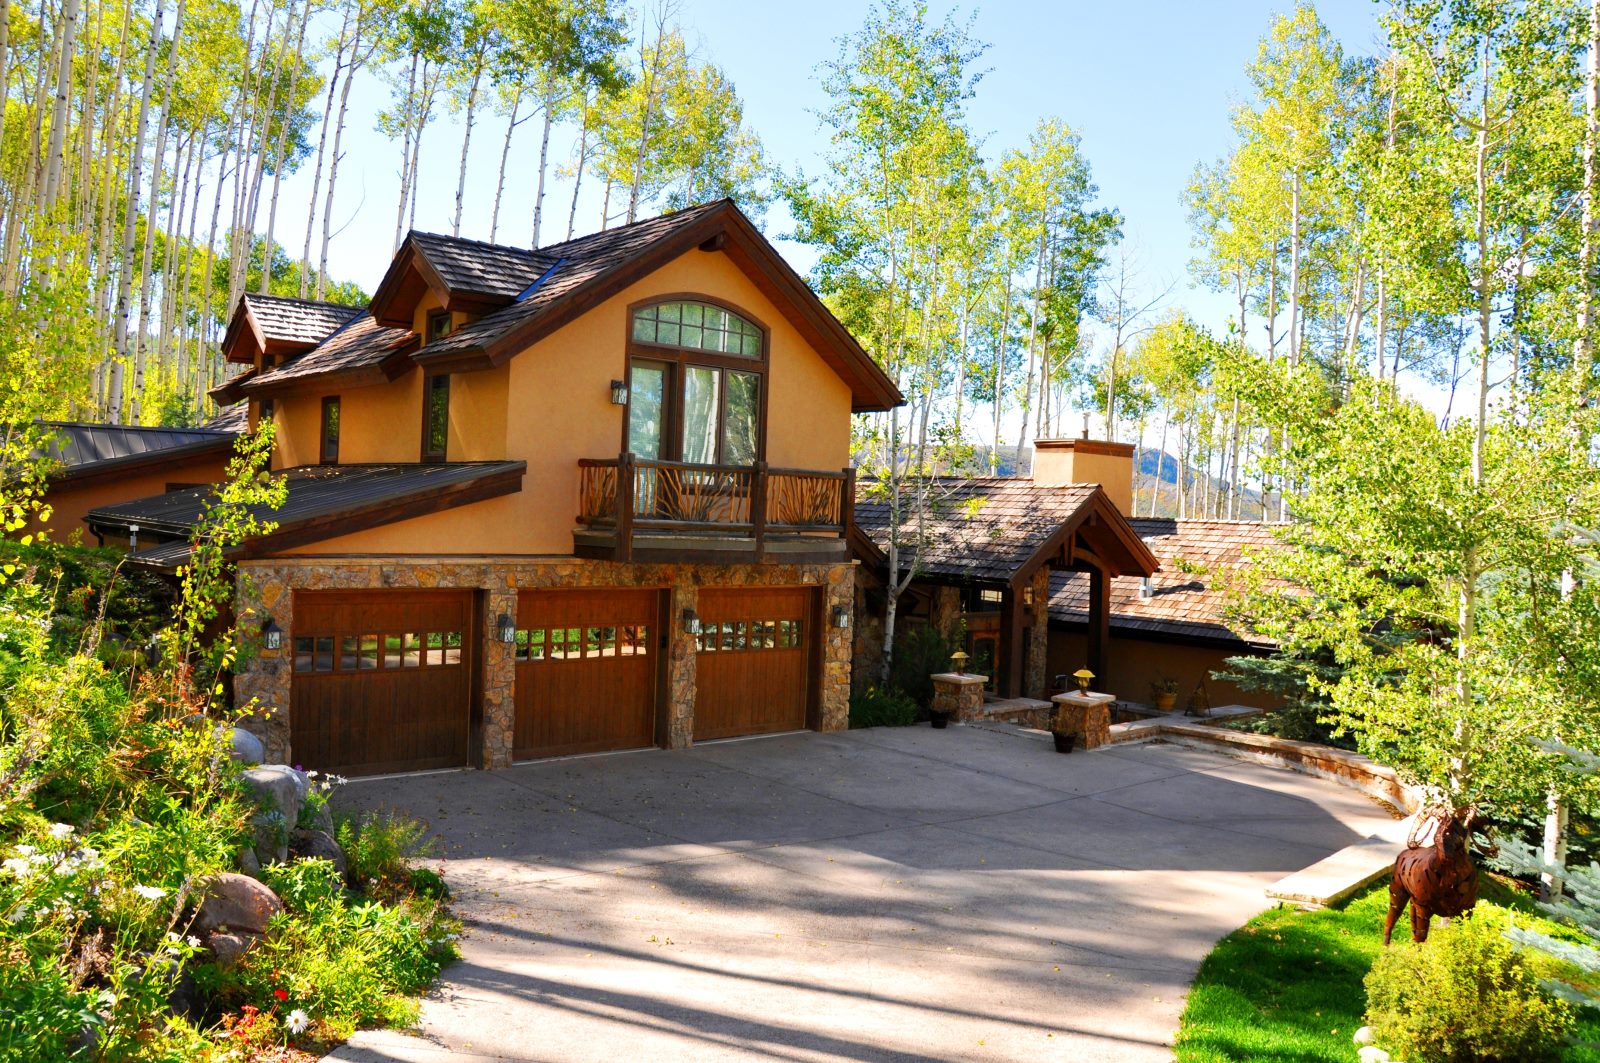 Ski to the Two Creeks Base Area via the Poma lift from the luxury 5BR home